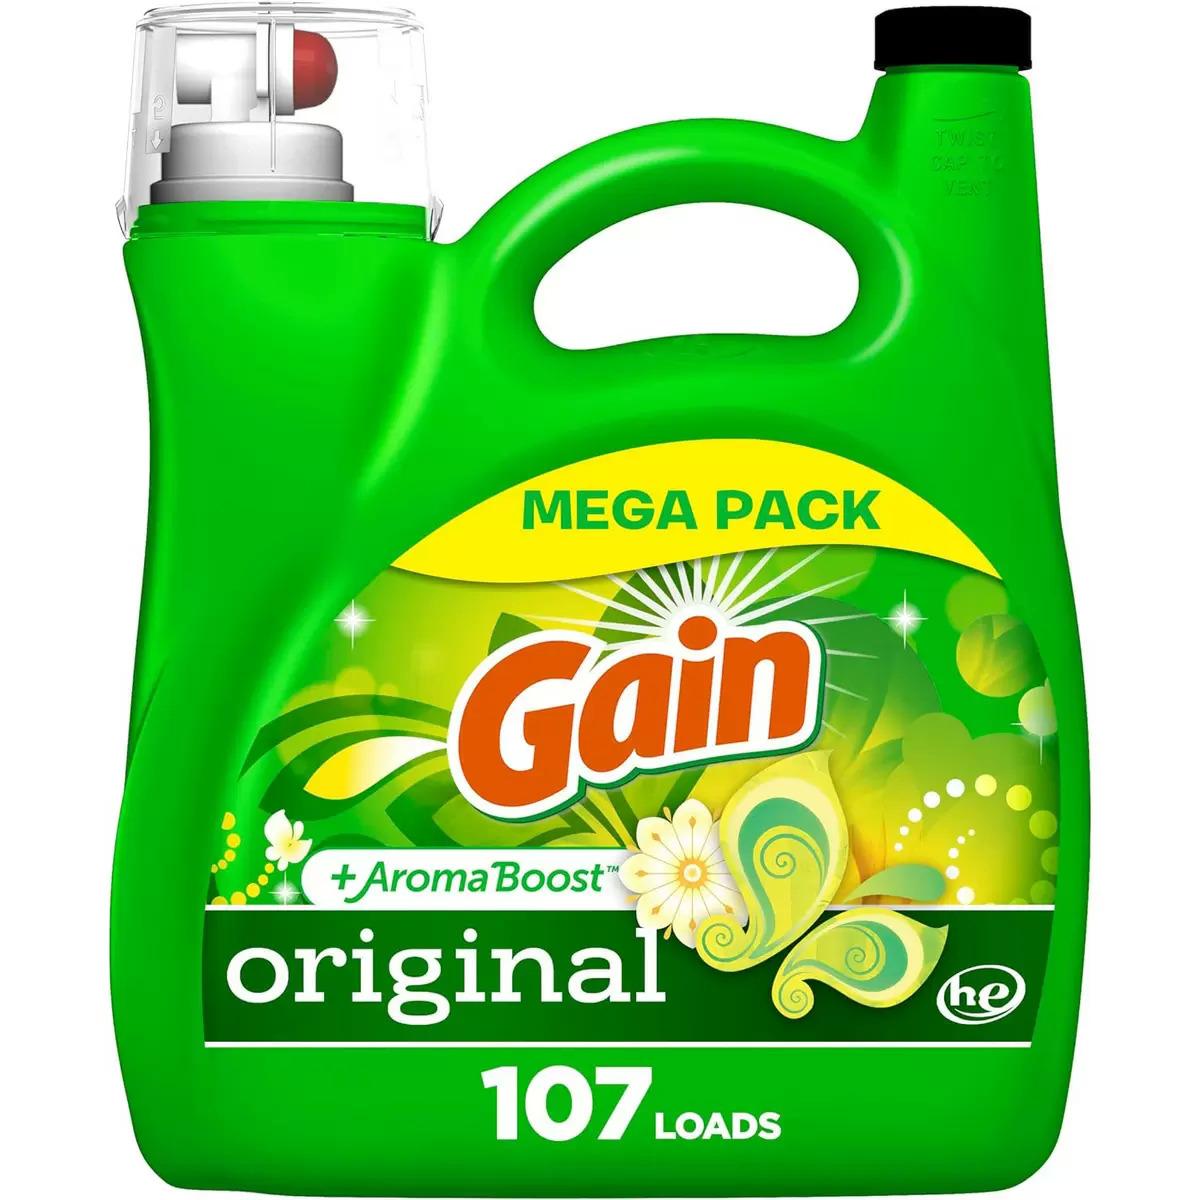 Gain + Aroma Boost Liquid Laundry Detergent for $11.14 Shipped